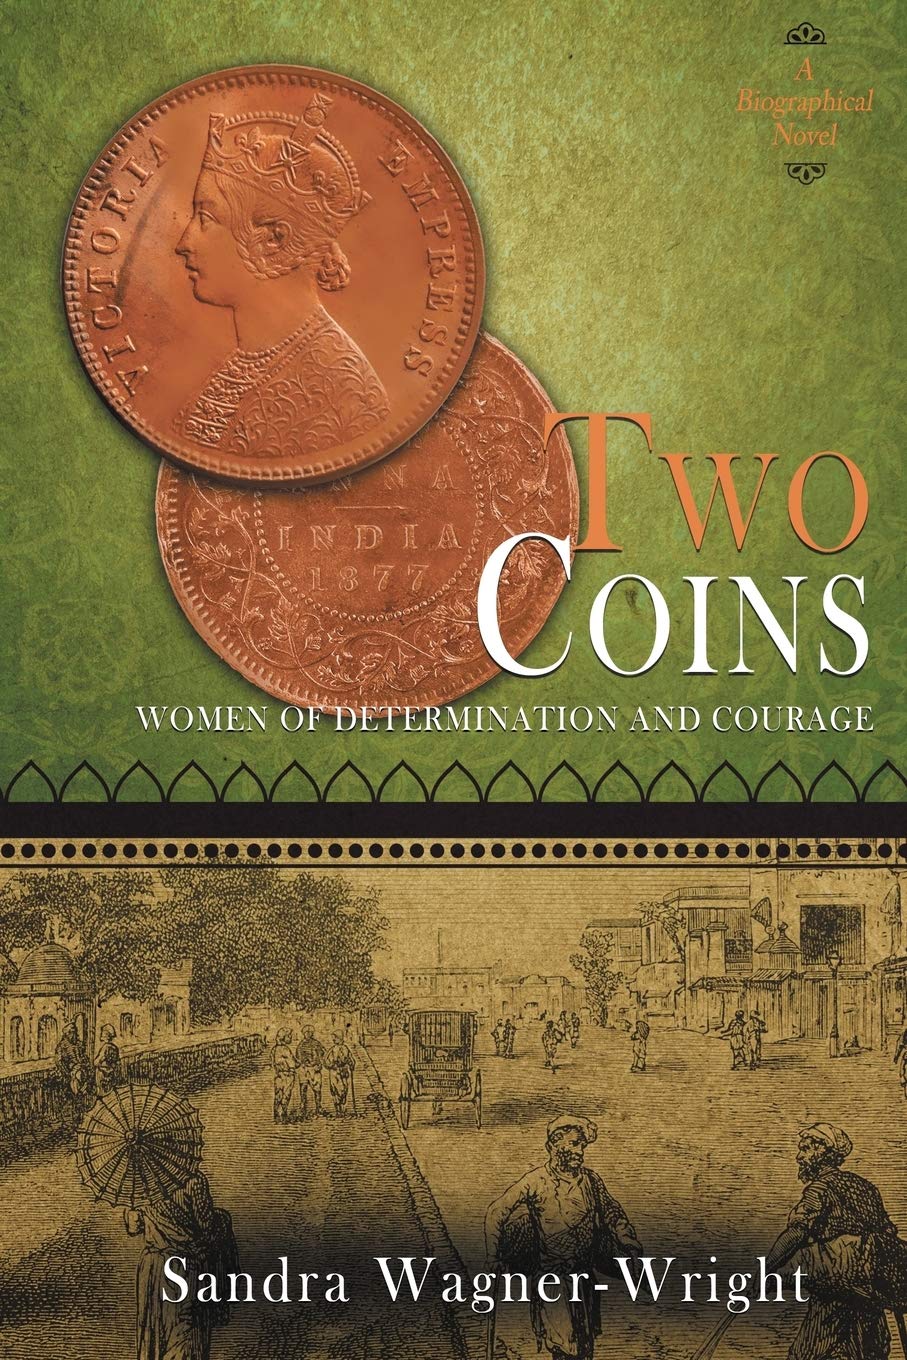 Two Coin by Sandra Wagner-Wright – Author Interview